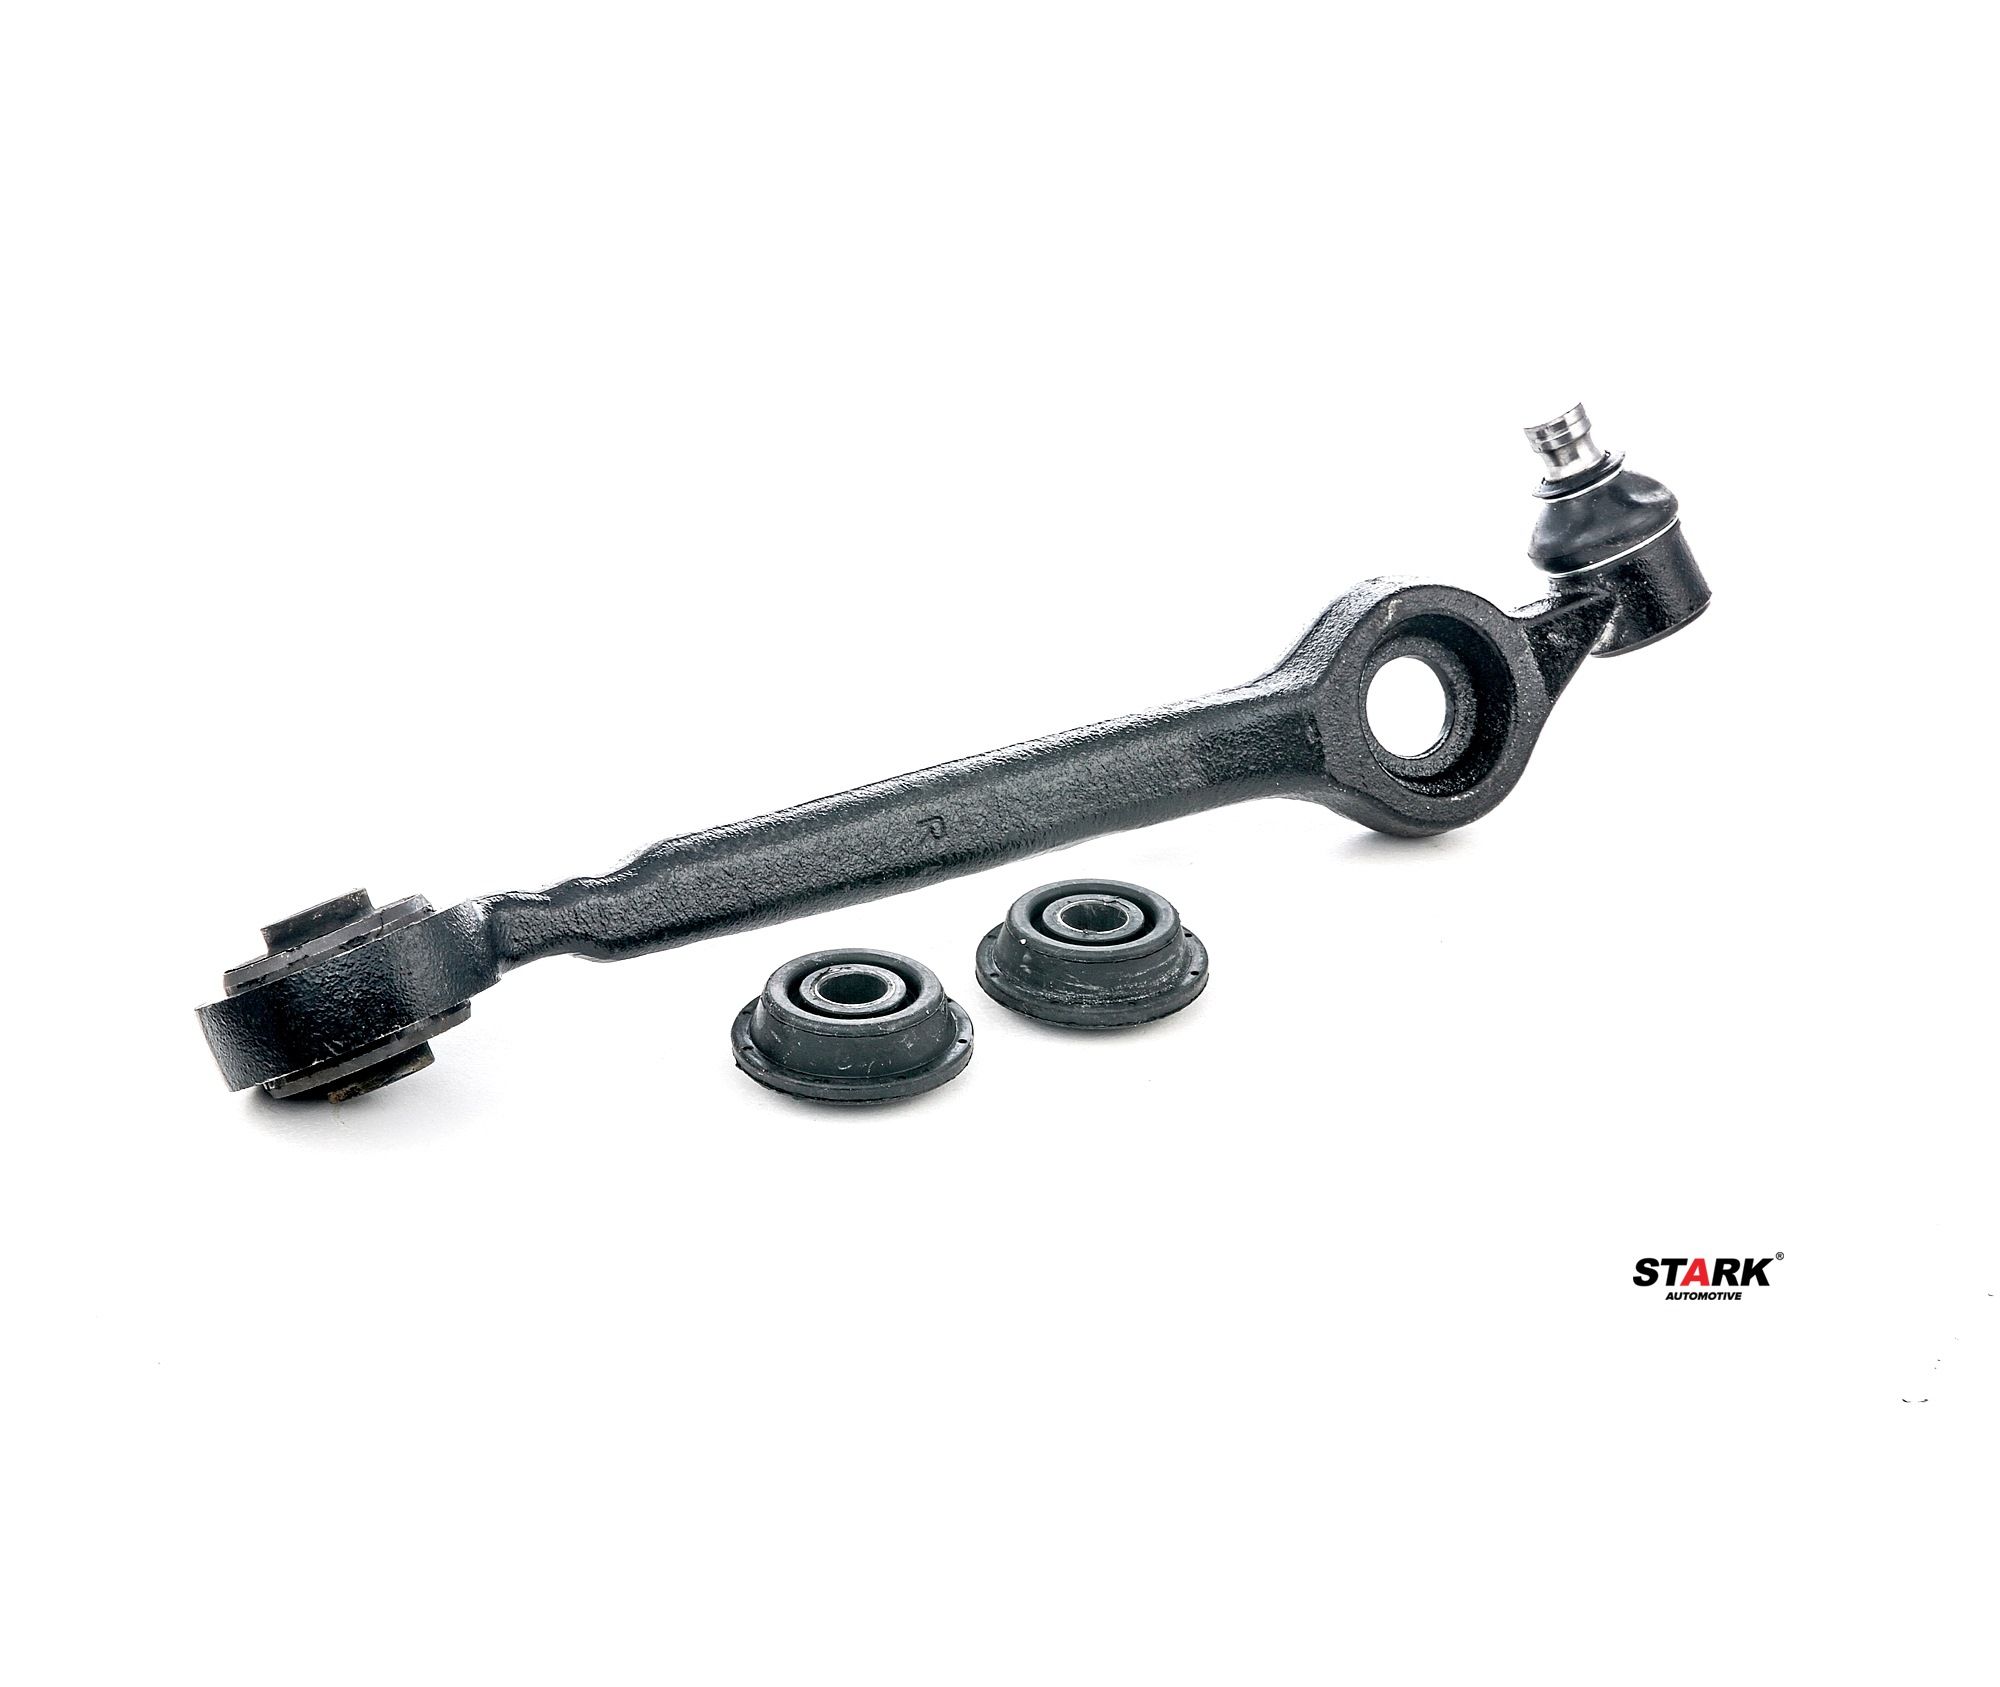 STARK SKCA-0050407 Suspension arm with rubber mount, Front Axle, Lower, Right, Control Arm, Steel, Cone Size: 19 mm